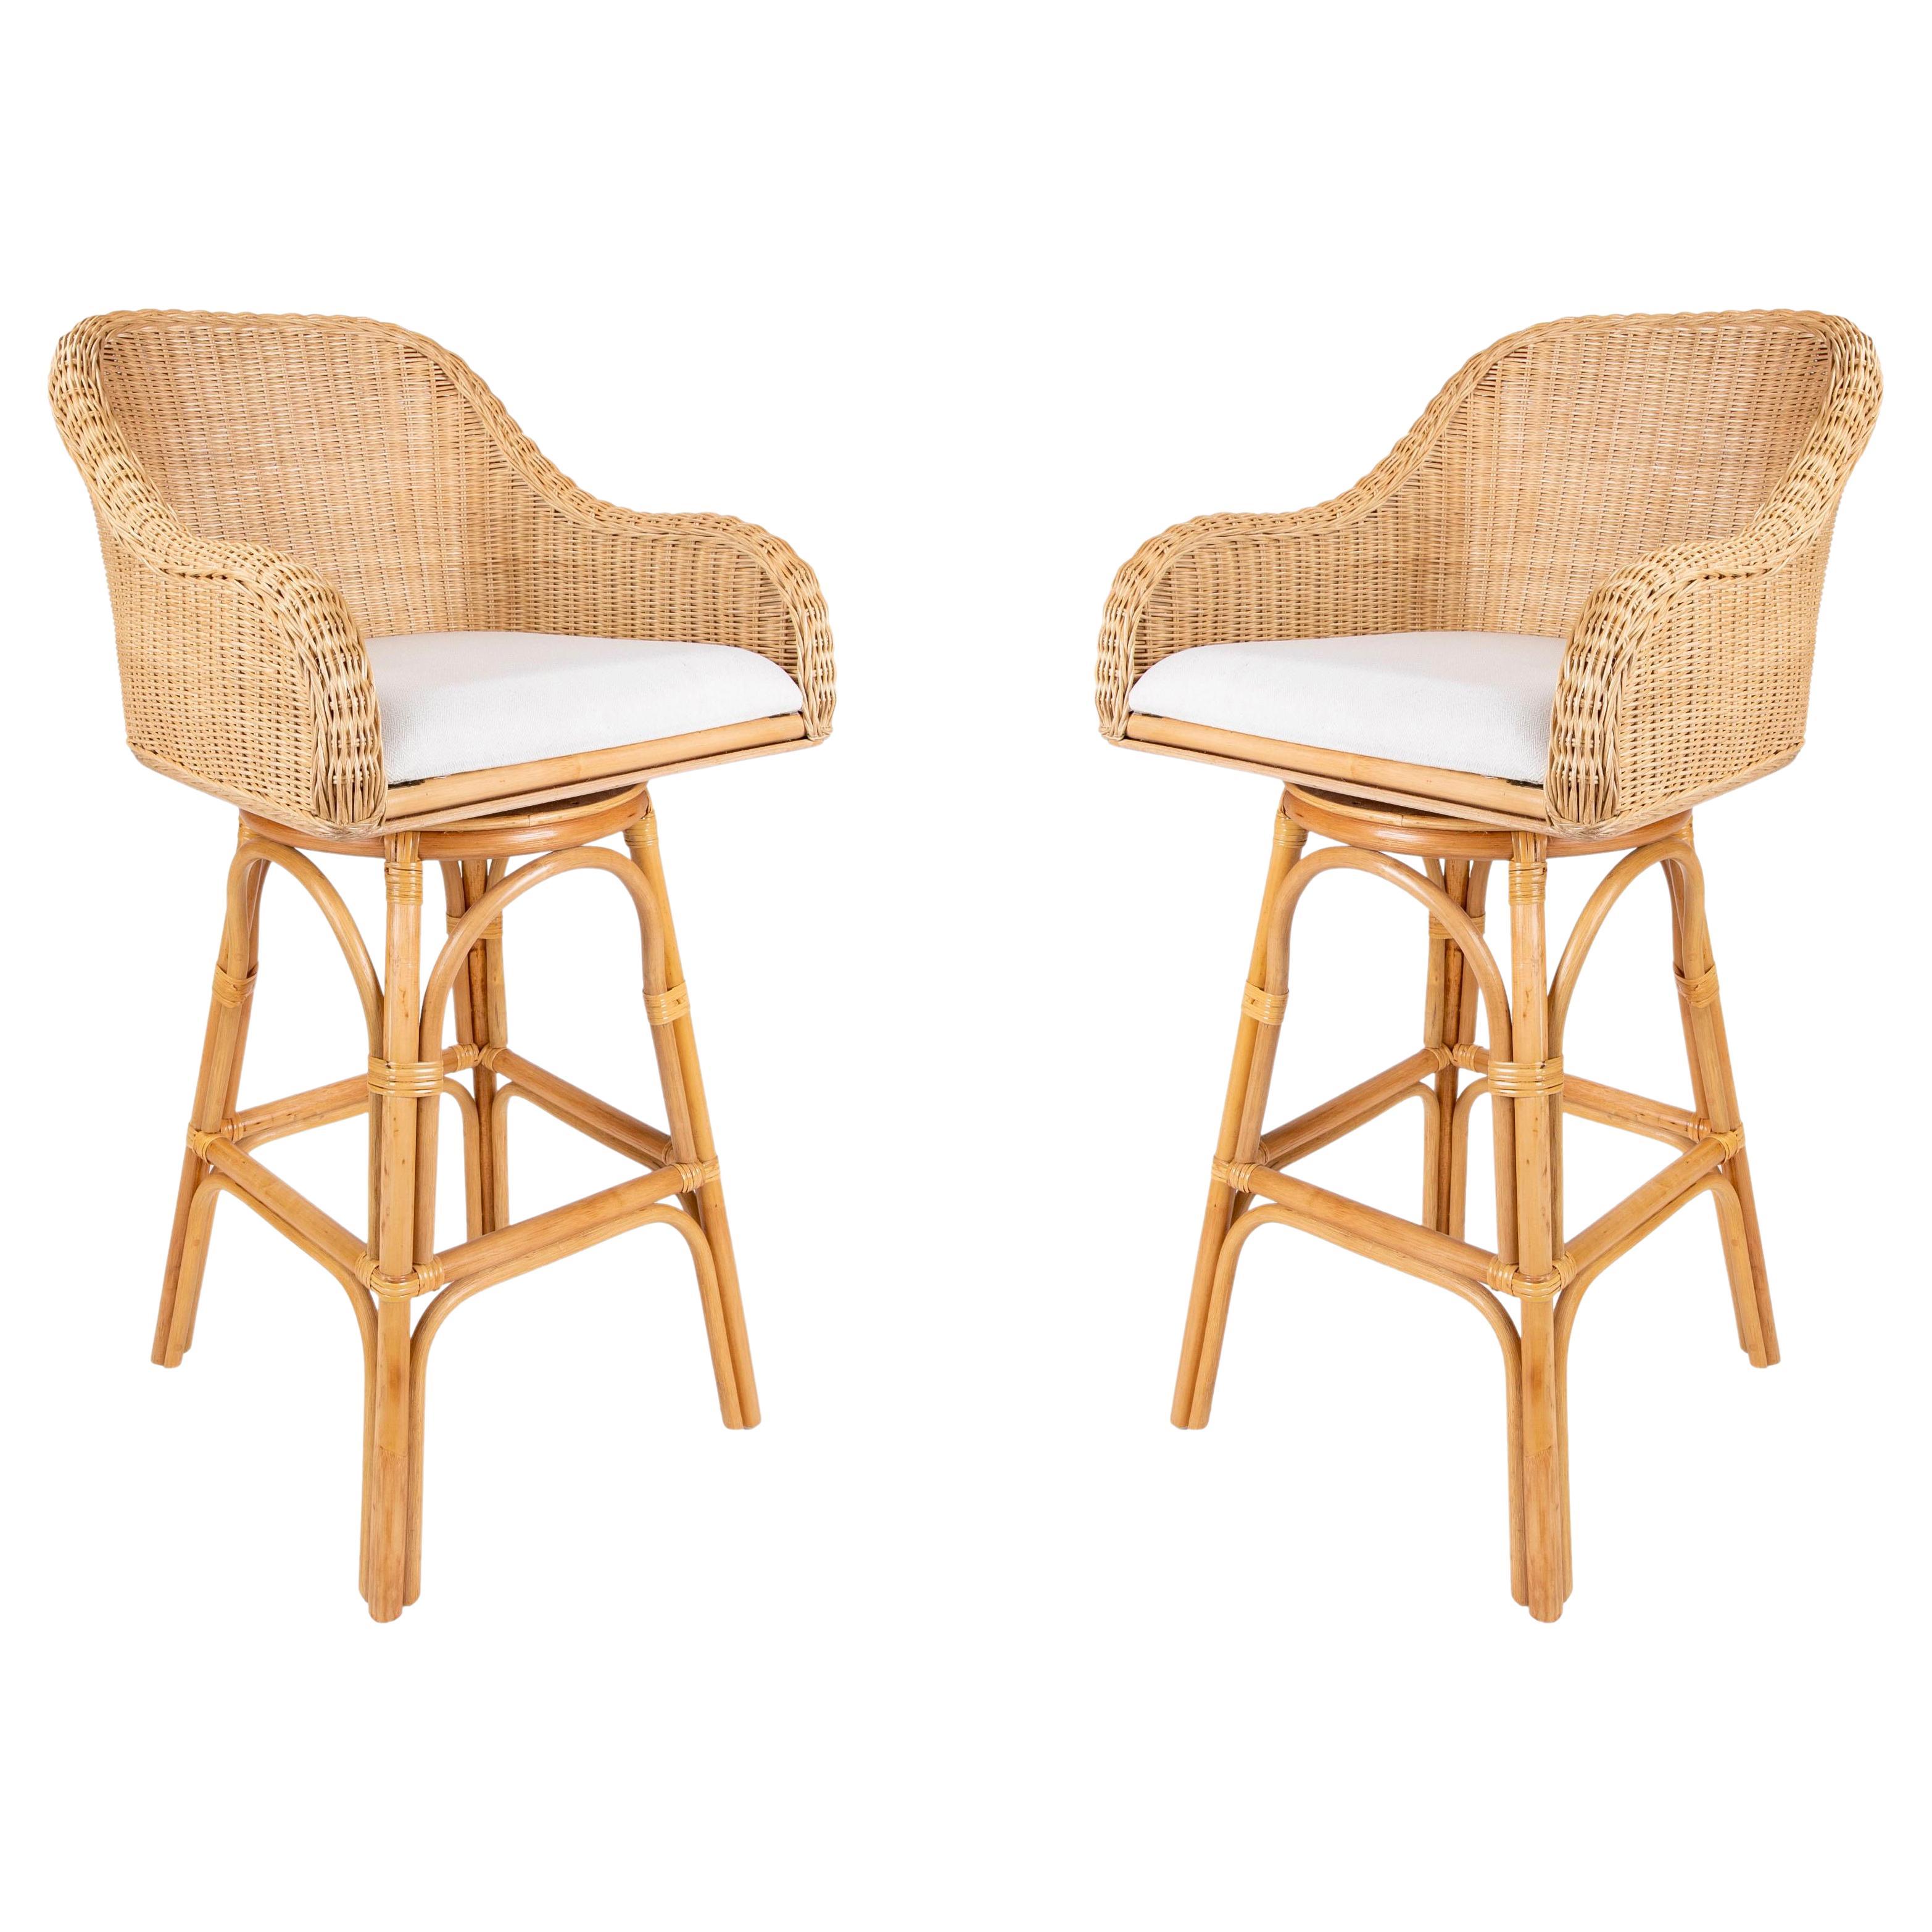 Pair of Two Upholstered Rattan and Wicker Bar stools with Sideways Movement